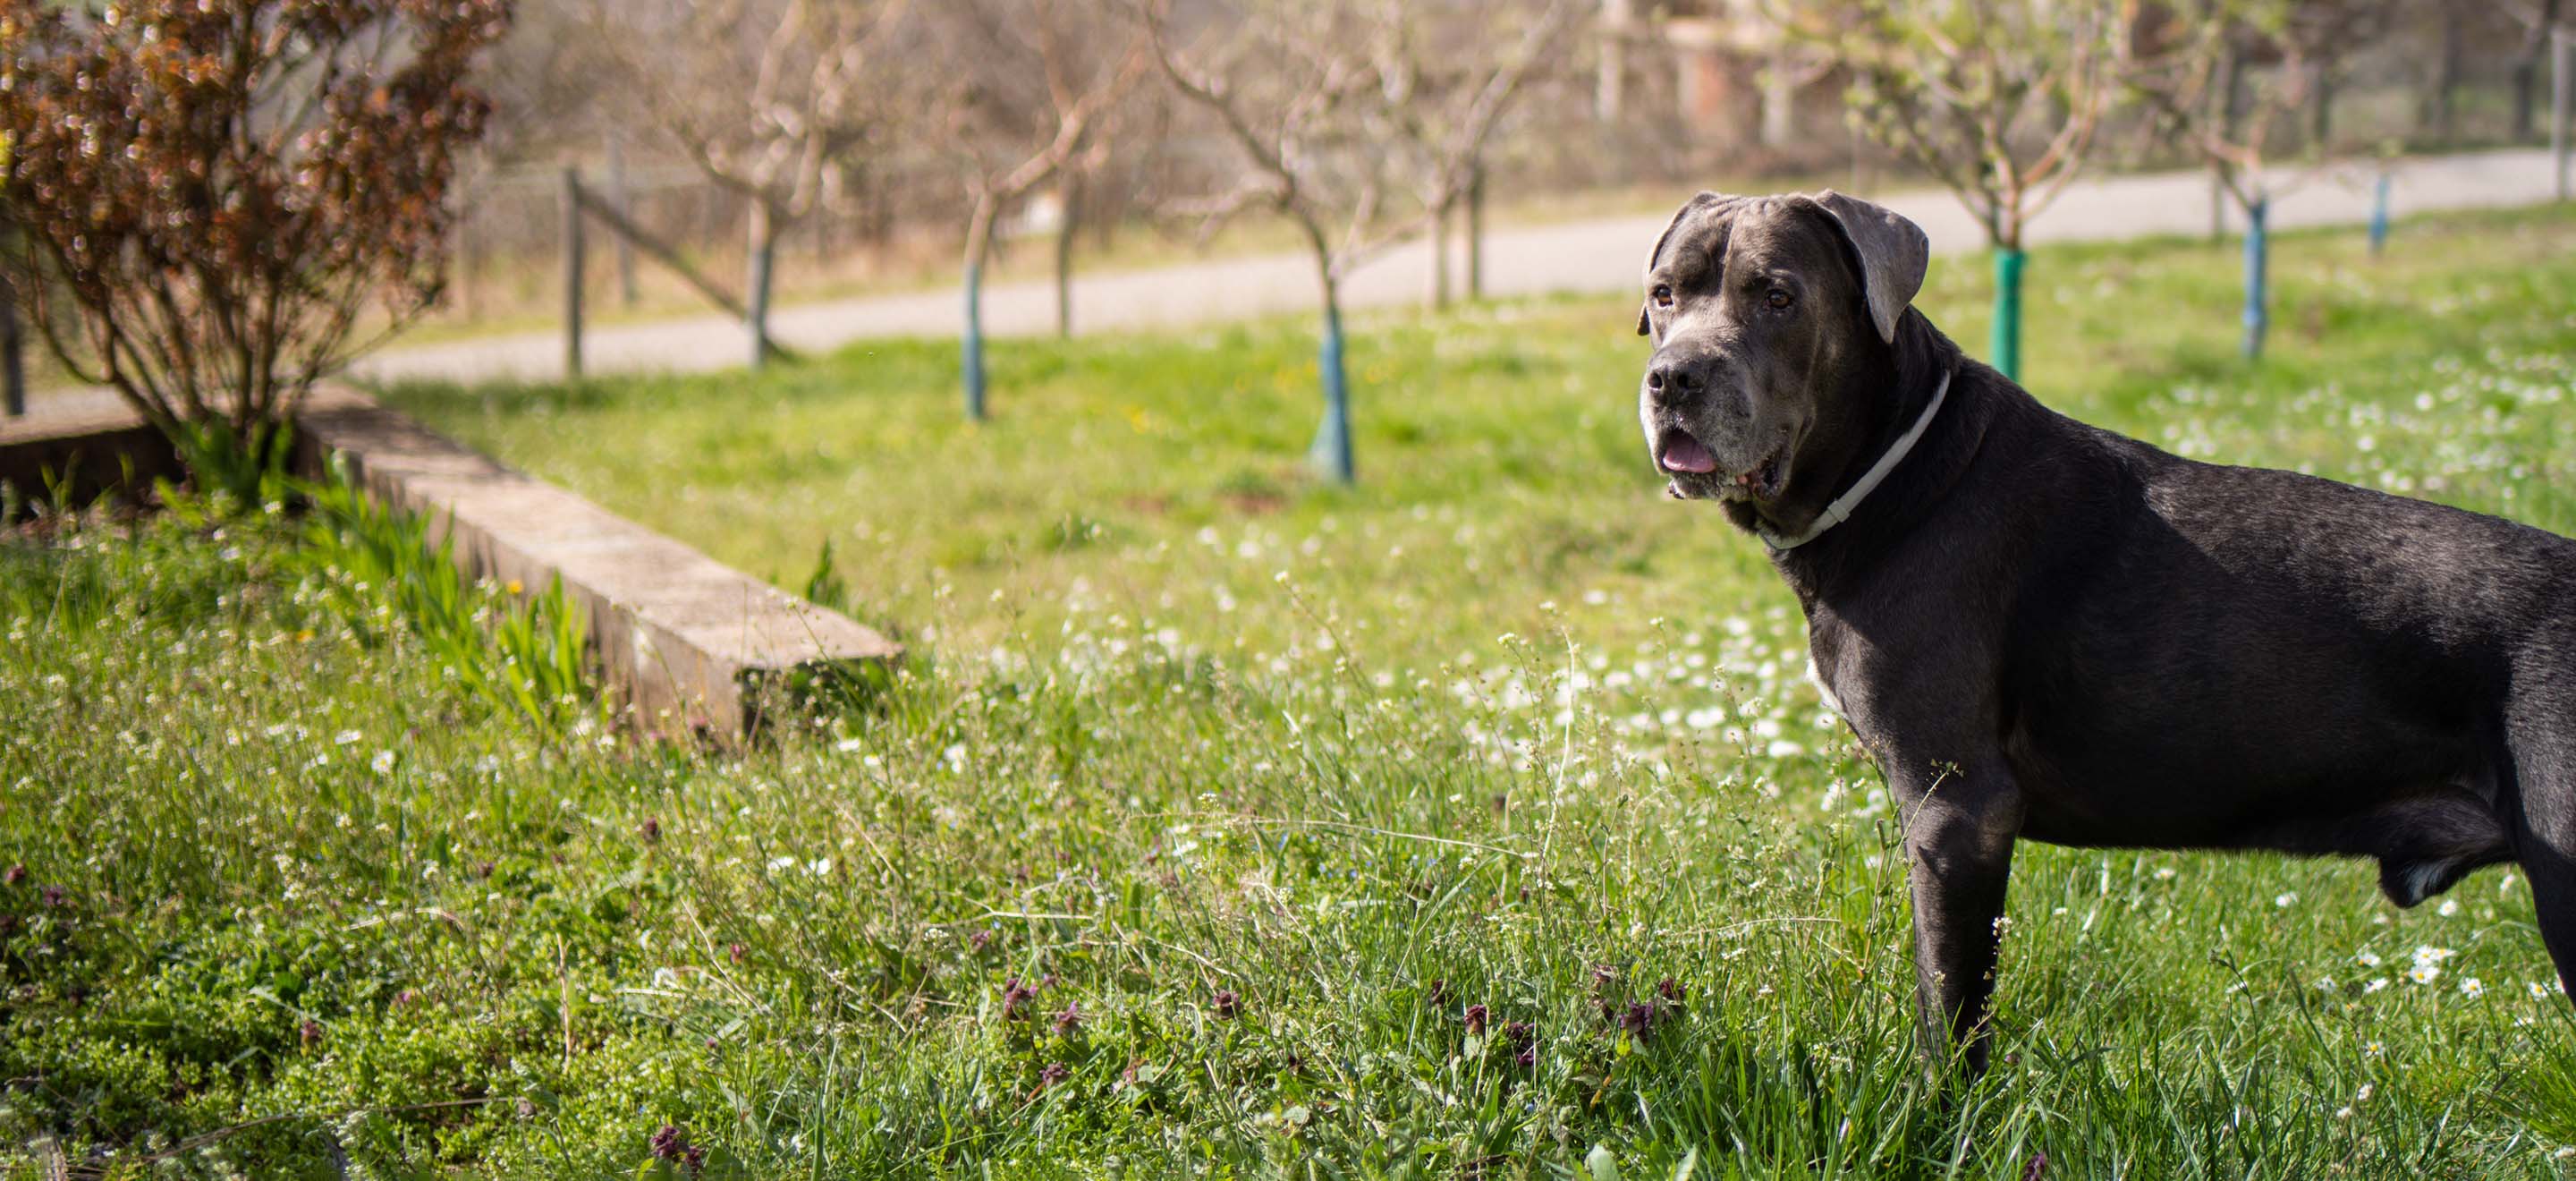 A dark gray Cane Corso dog standing in a field image